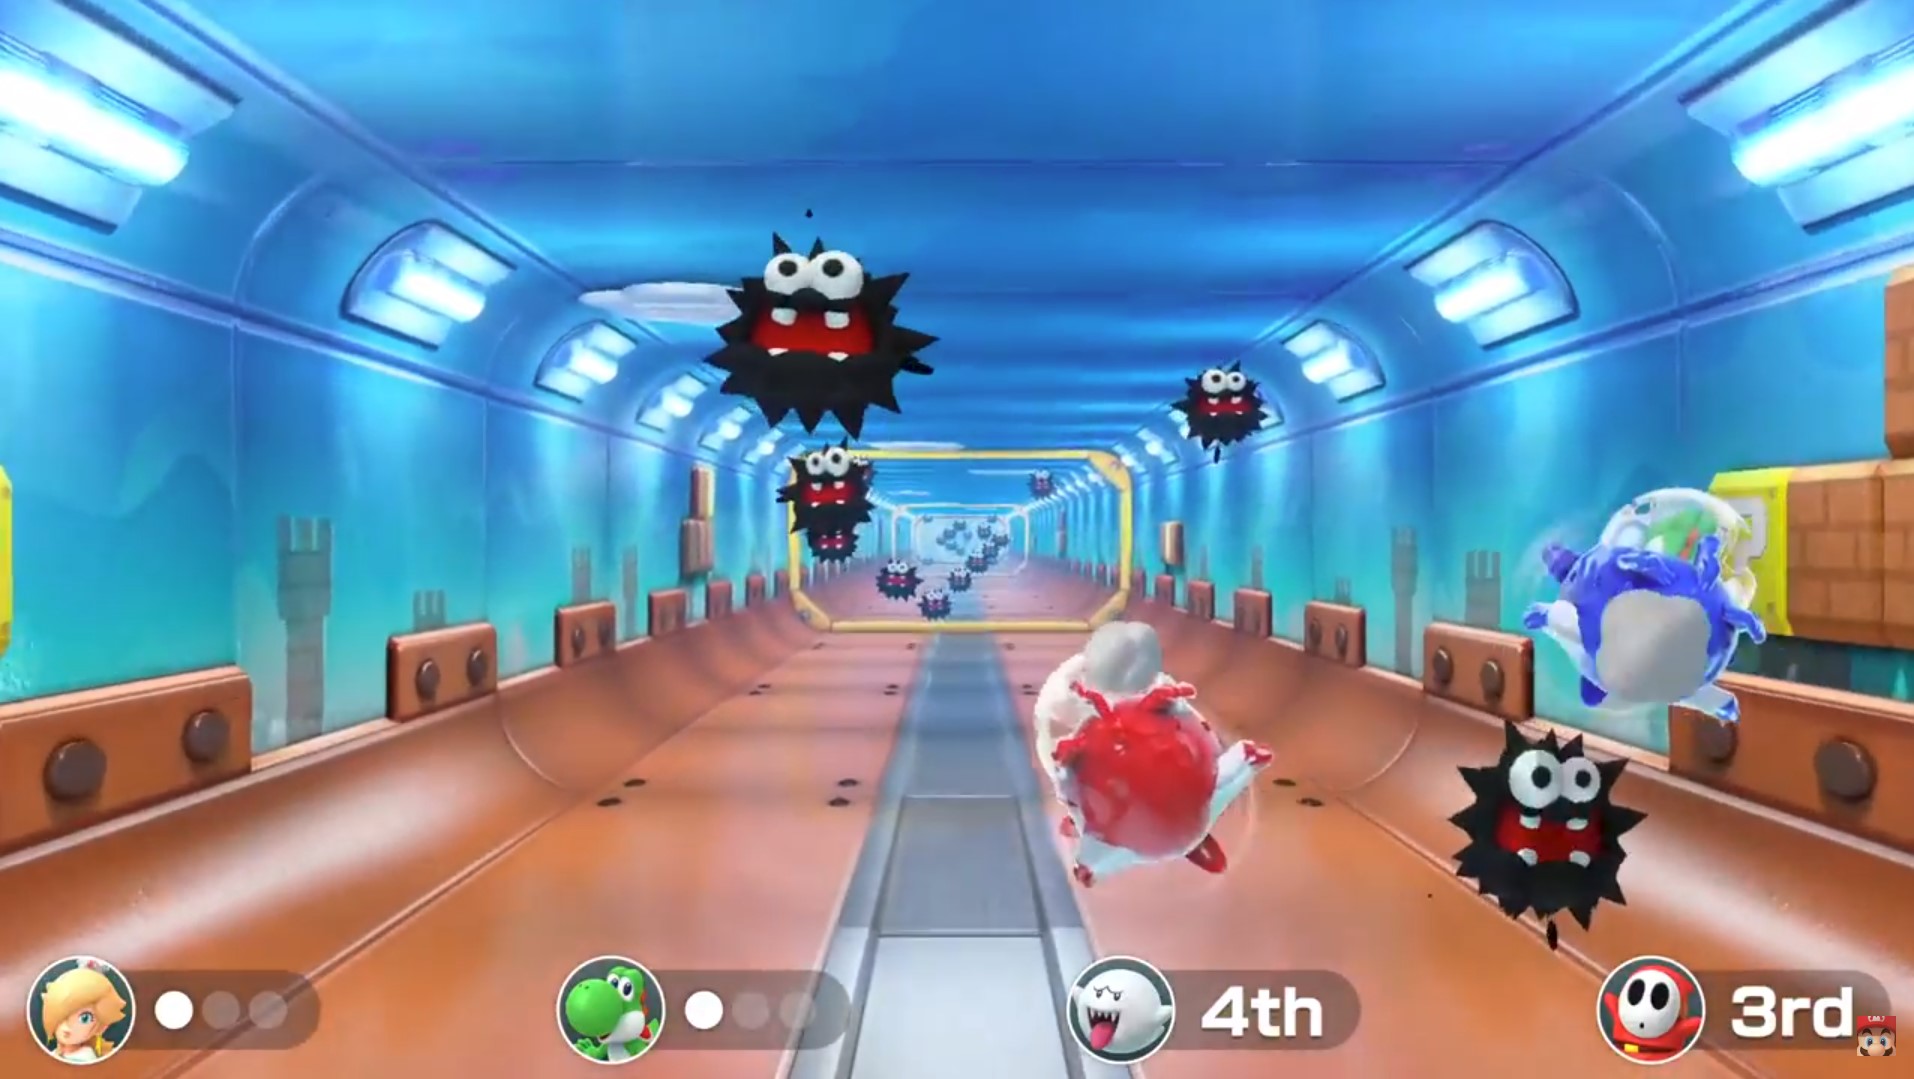 Super Mario Party has online mini-games with new Mariothon mode